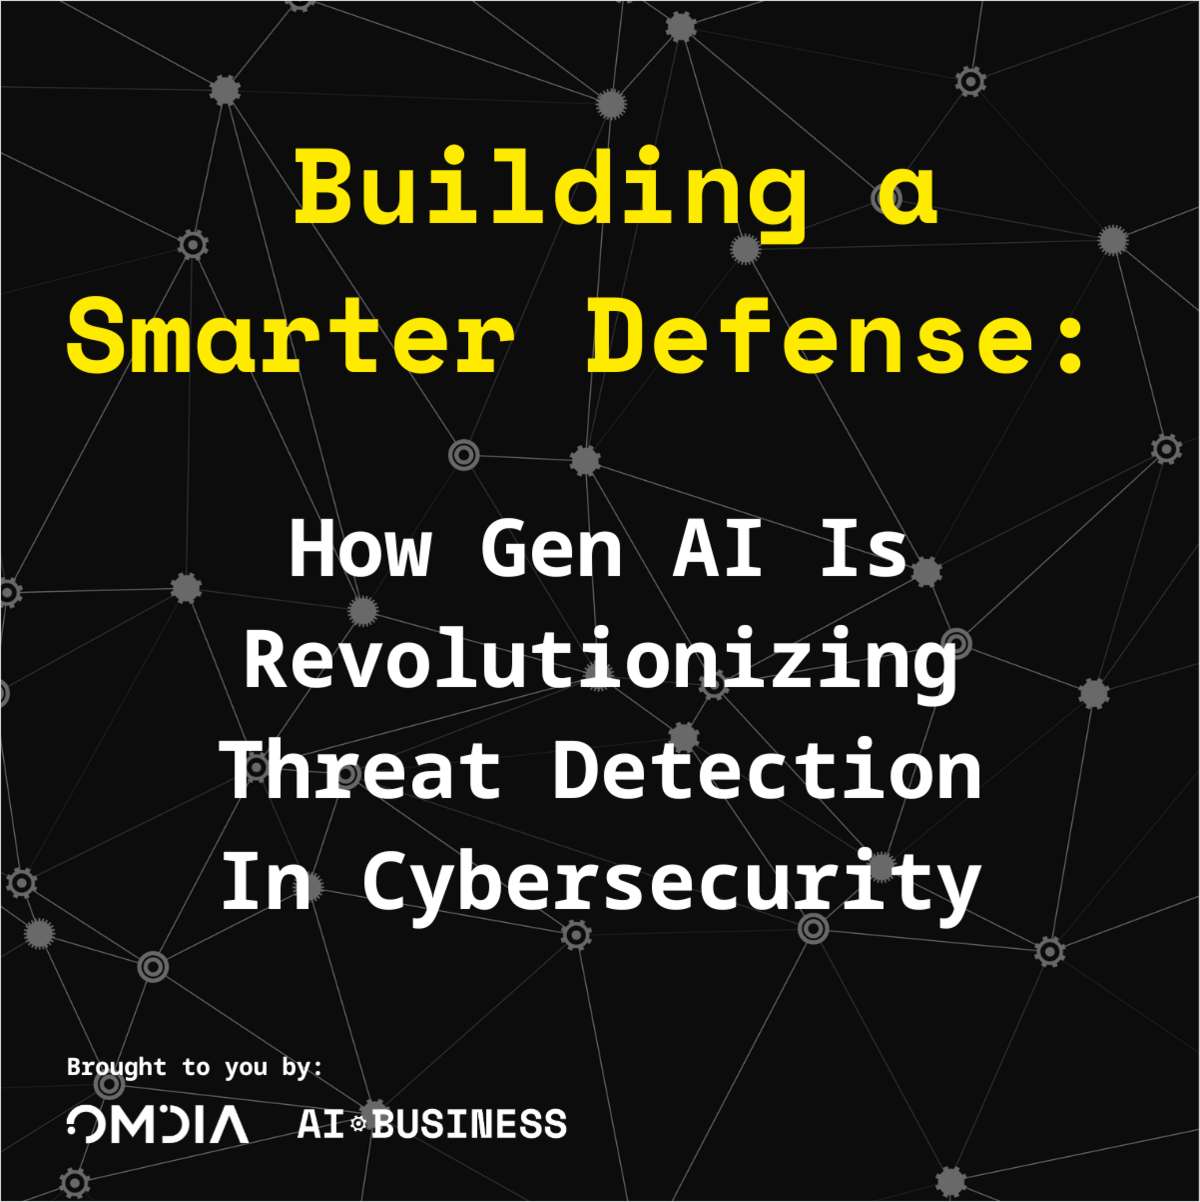 How Gen AI Is Revolutionizing Threat Detection In Cybersecurity